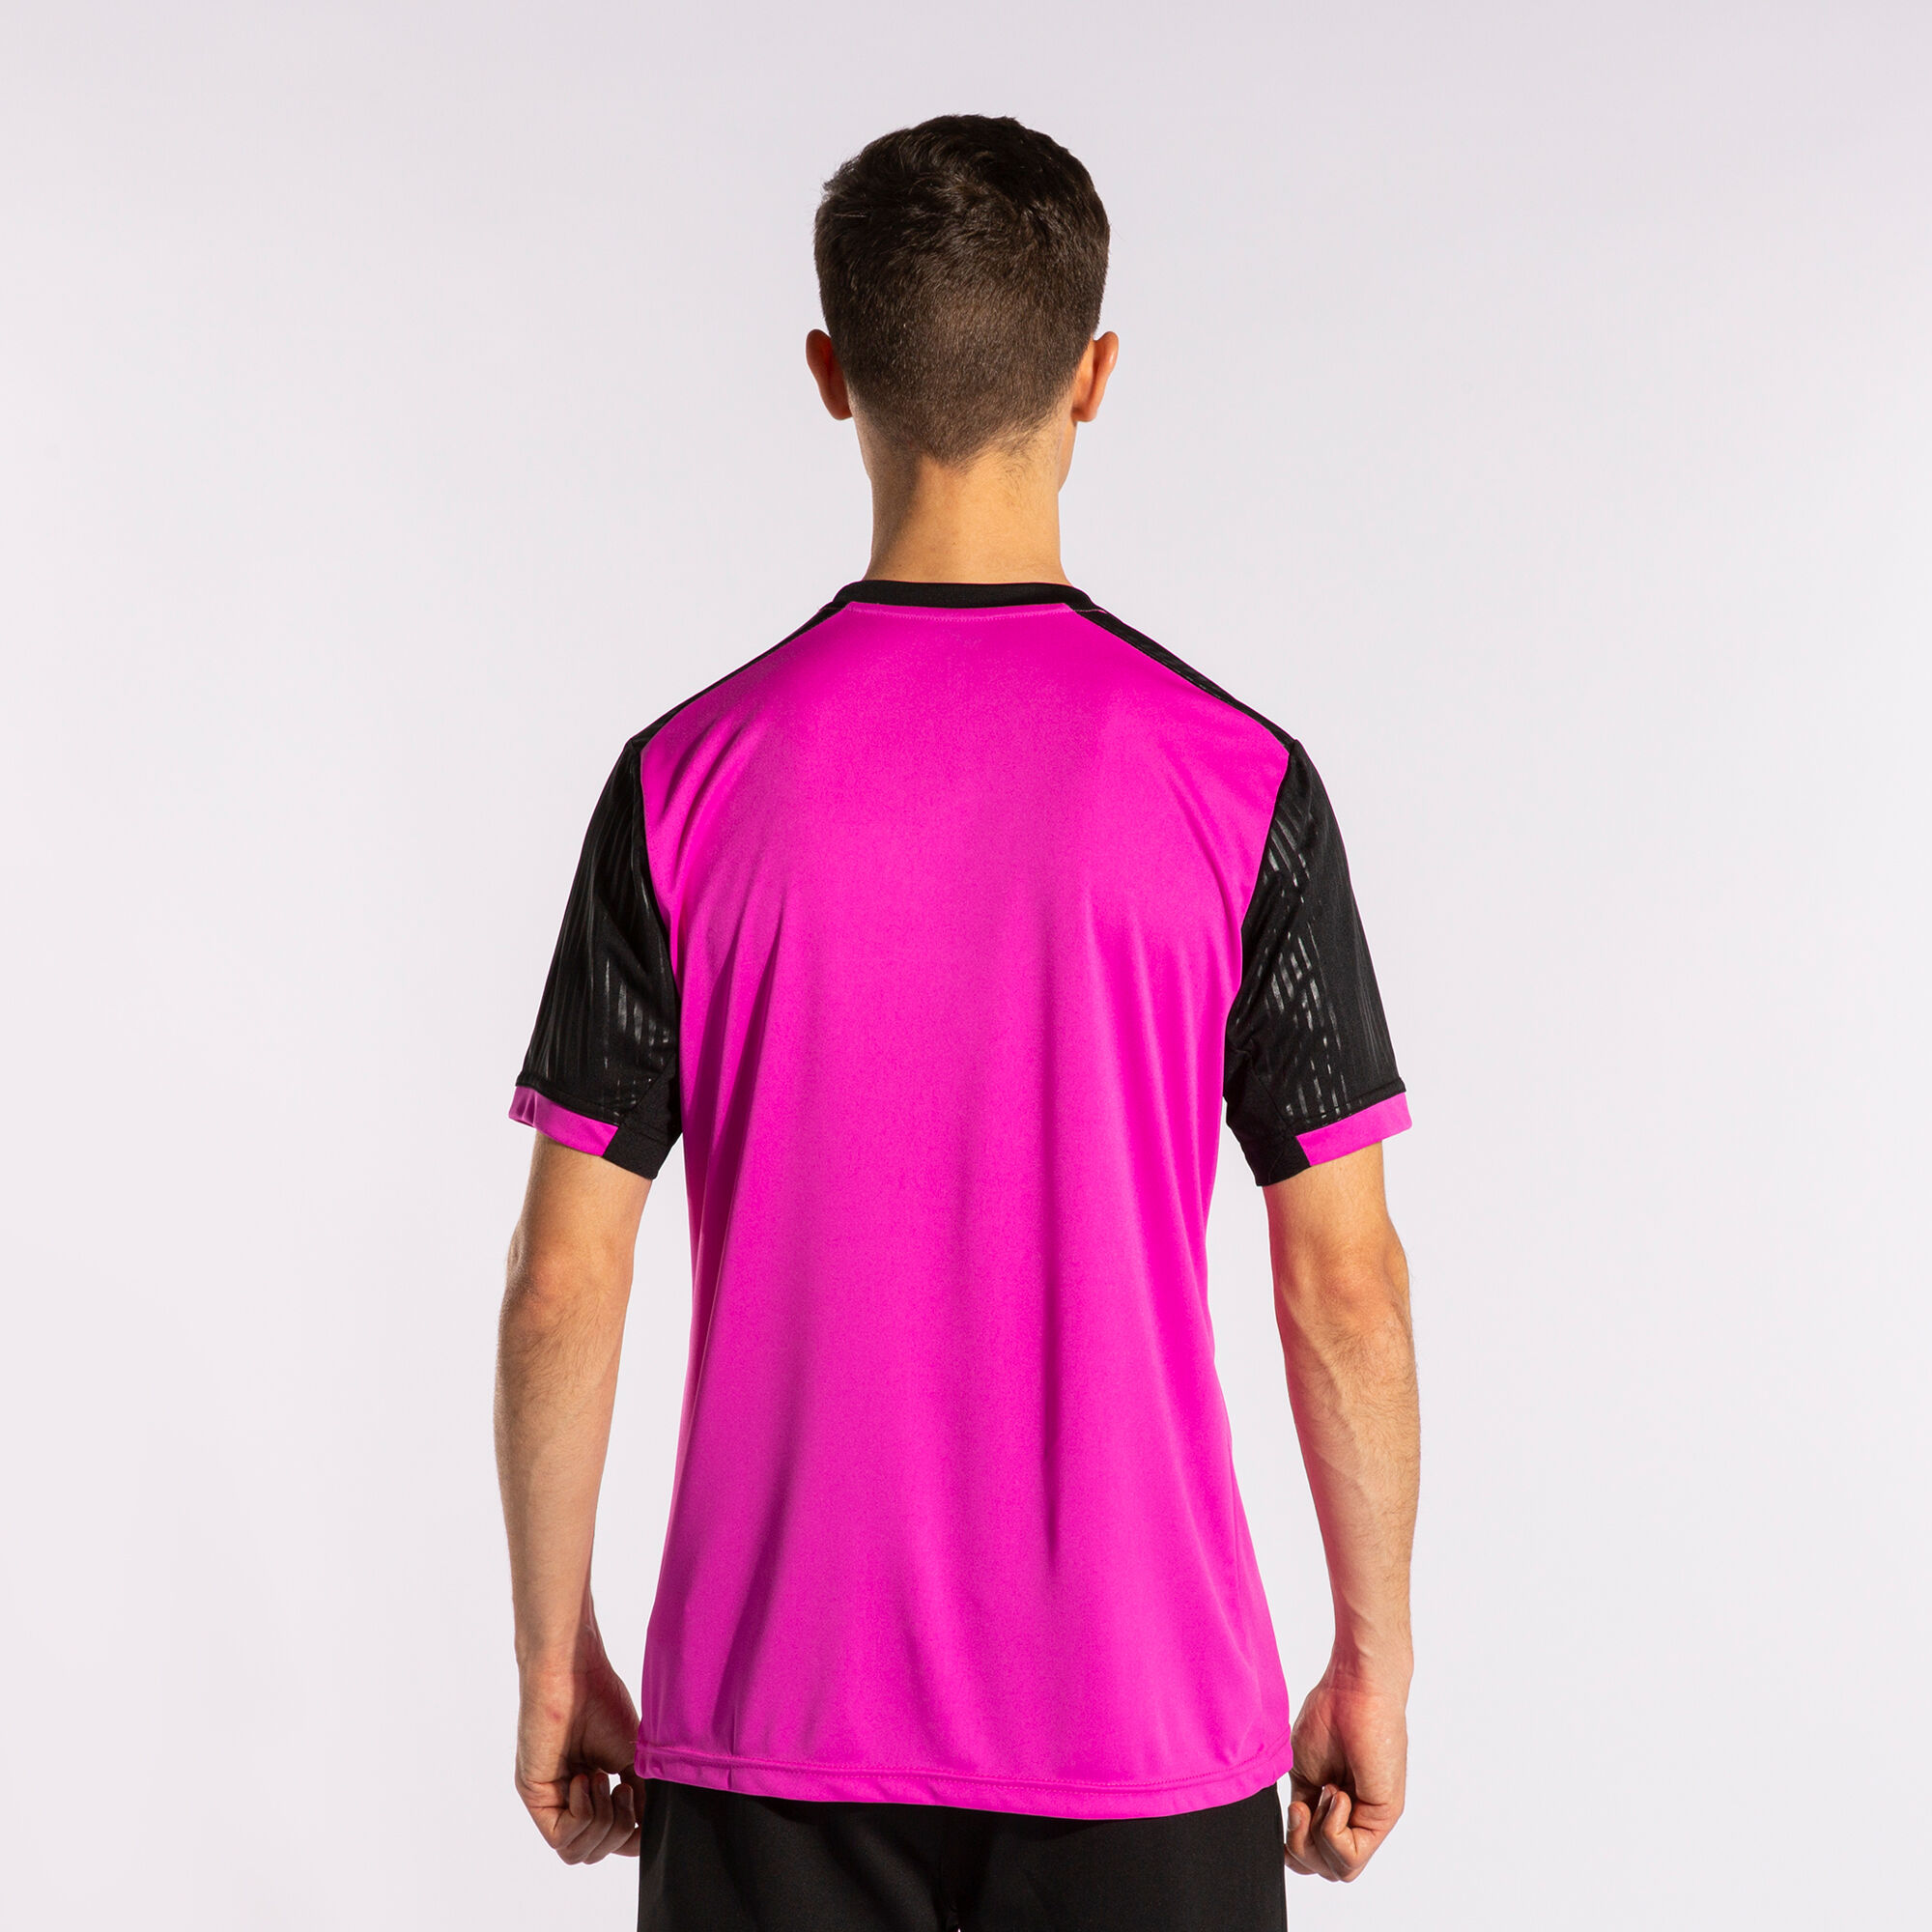 MAILLOT MANCHES COURTES HOMME MONTREAL ROSE FLUO NOIR